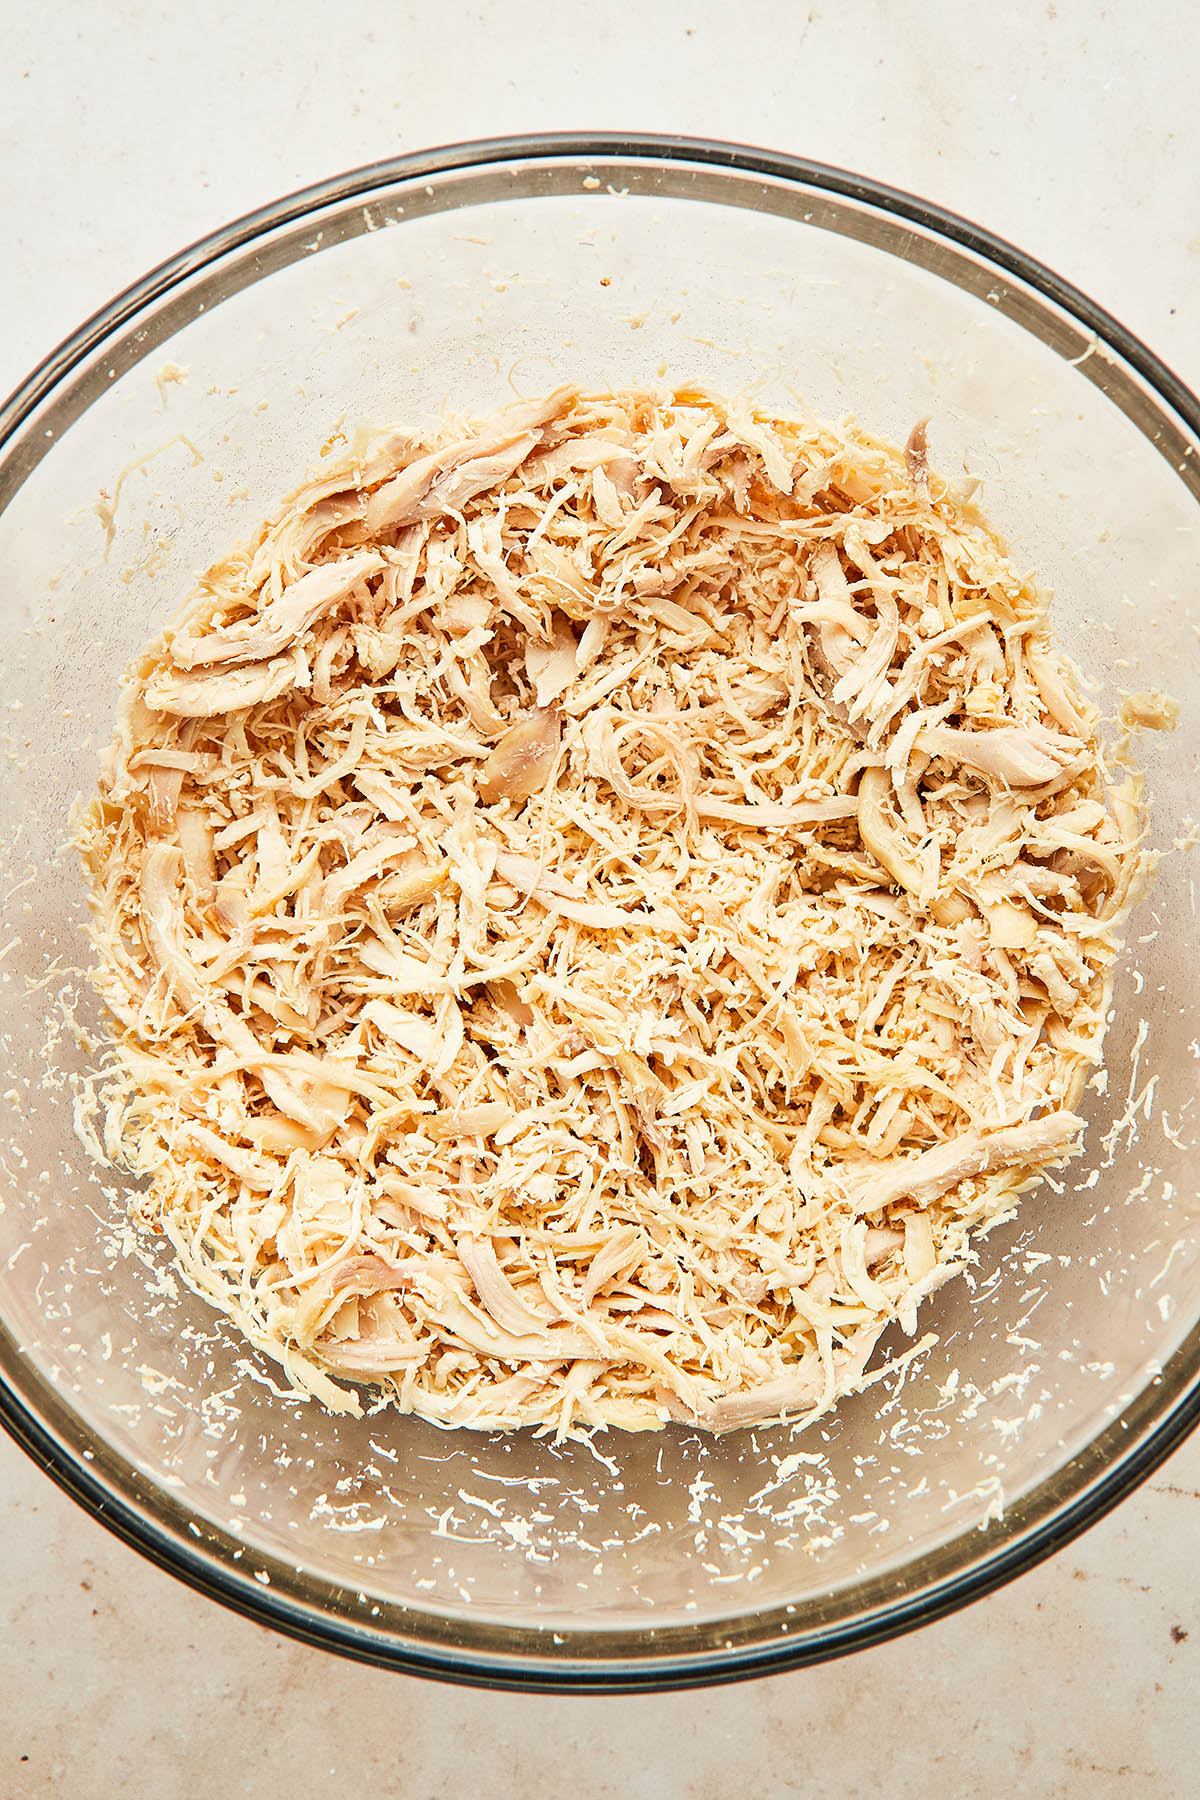 A large glass mixing bowl of shredded chicken.